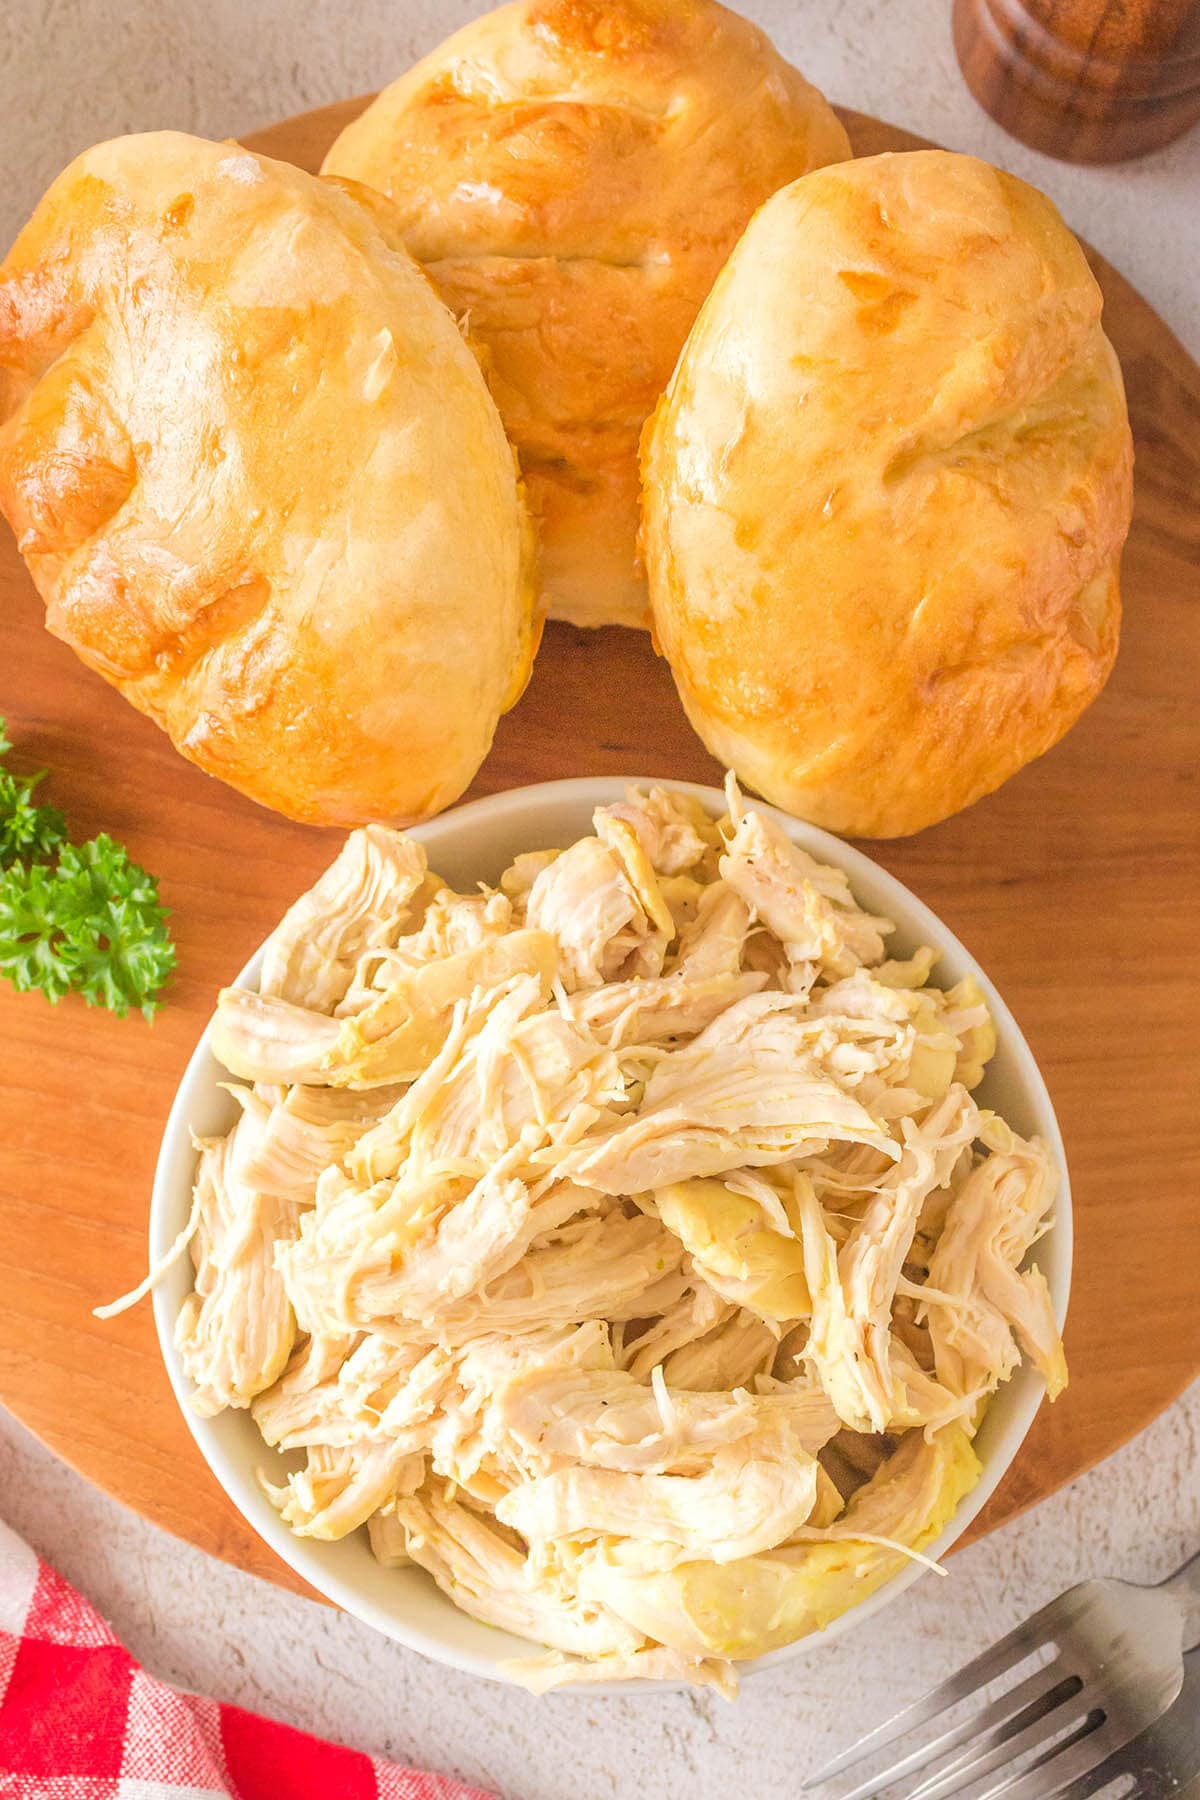 Lemon pepper shredded chicken in bowl with crusty rolls to make sandwiches with.